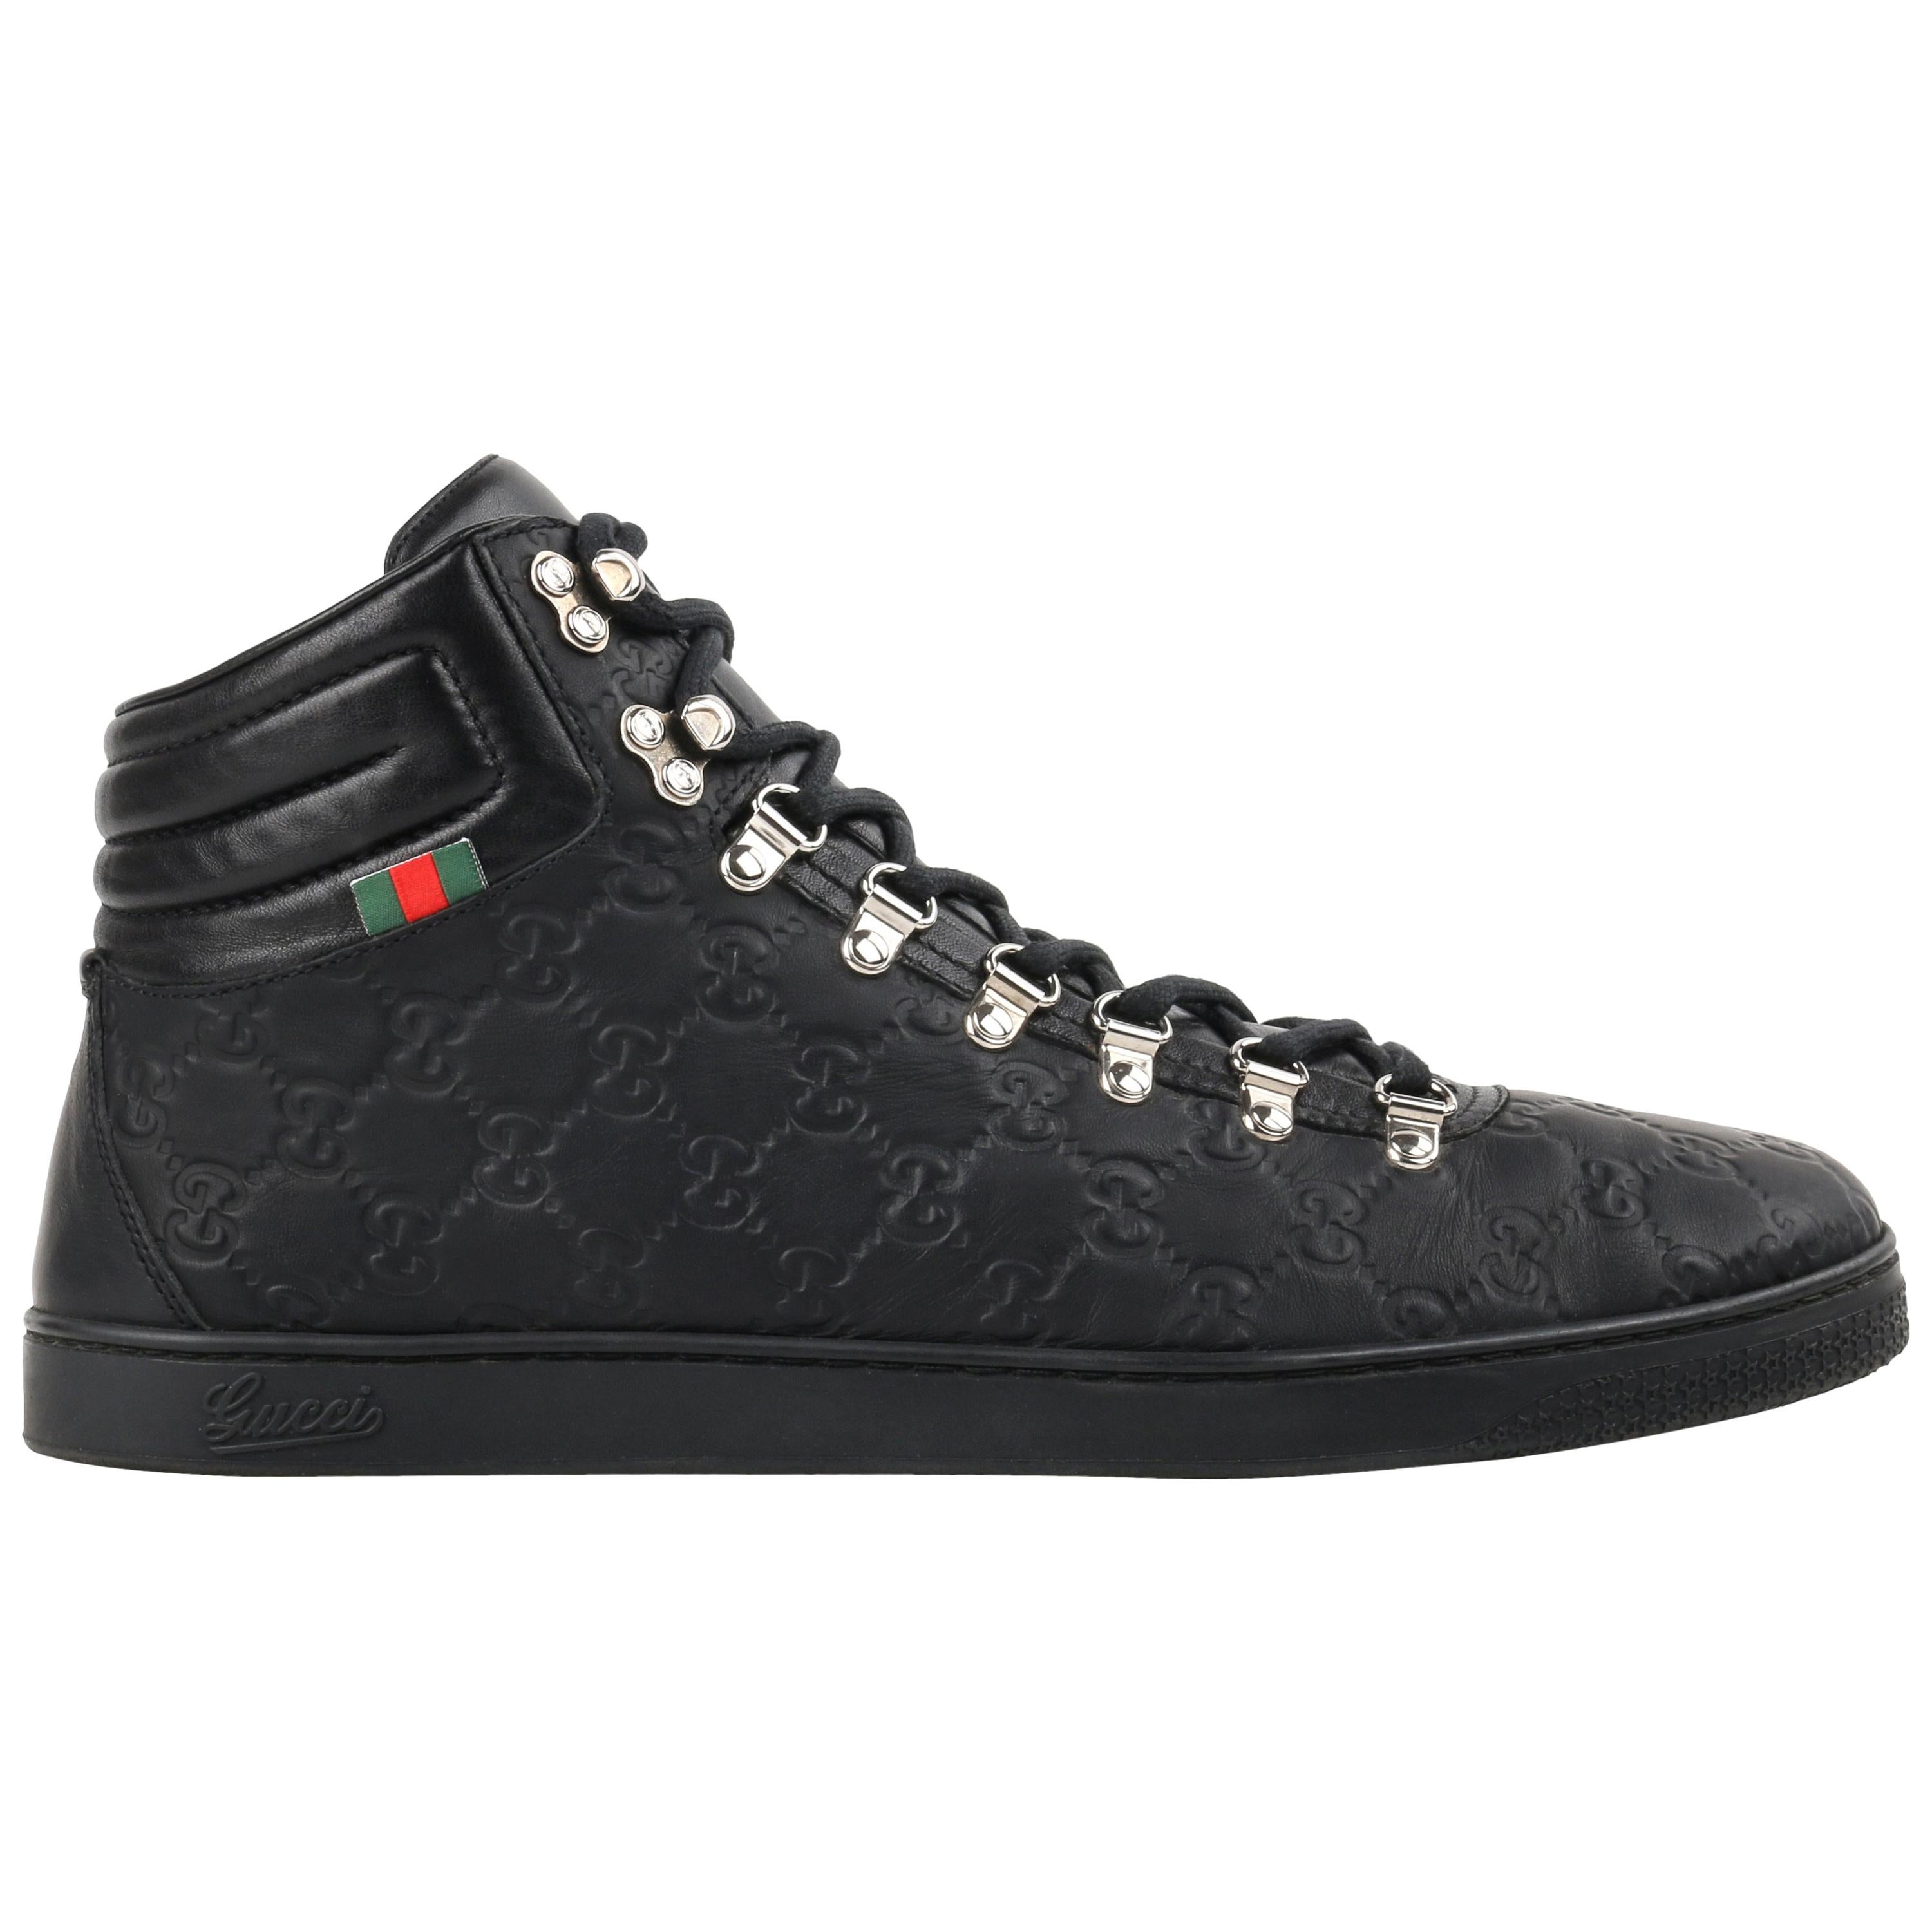 GUCCI "Guccissima" Black Leather Monogram Lace Up High Top Sneakers 